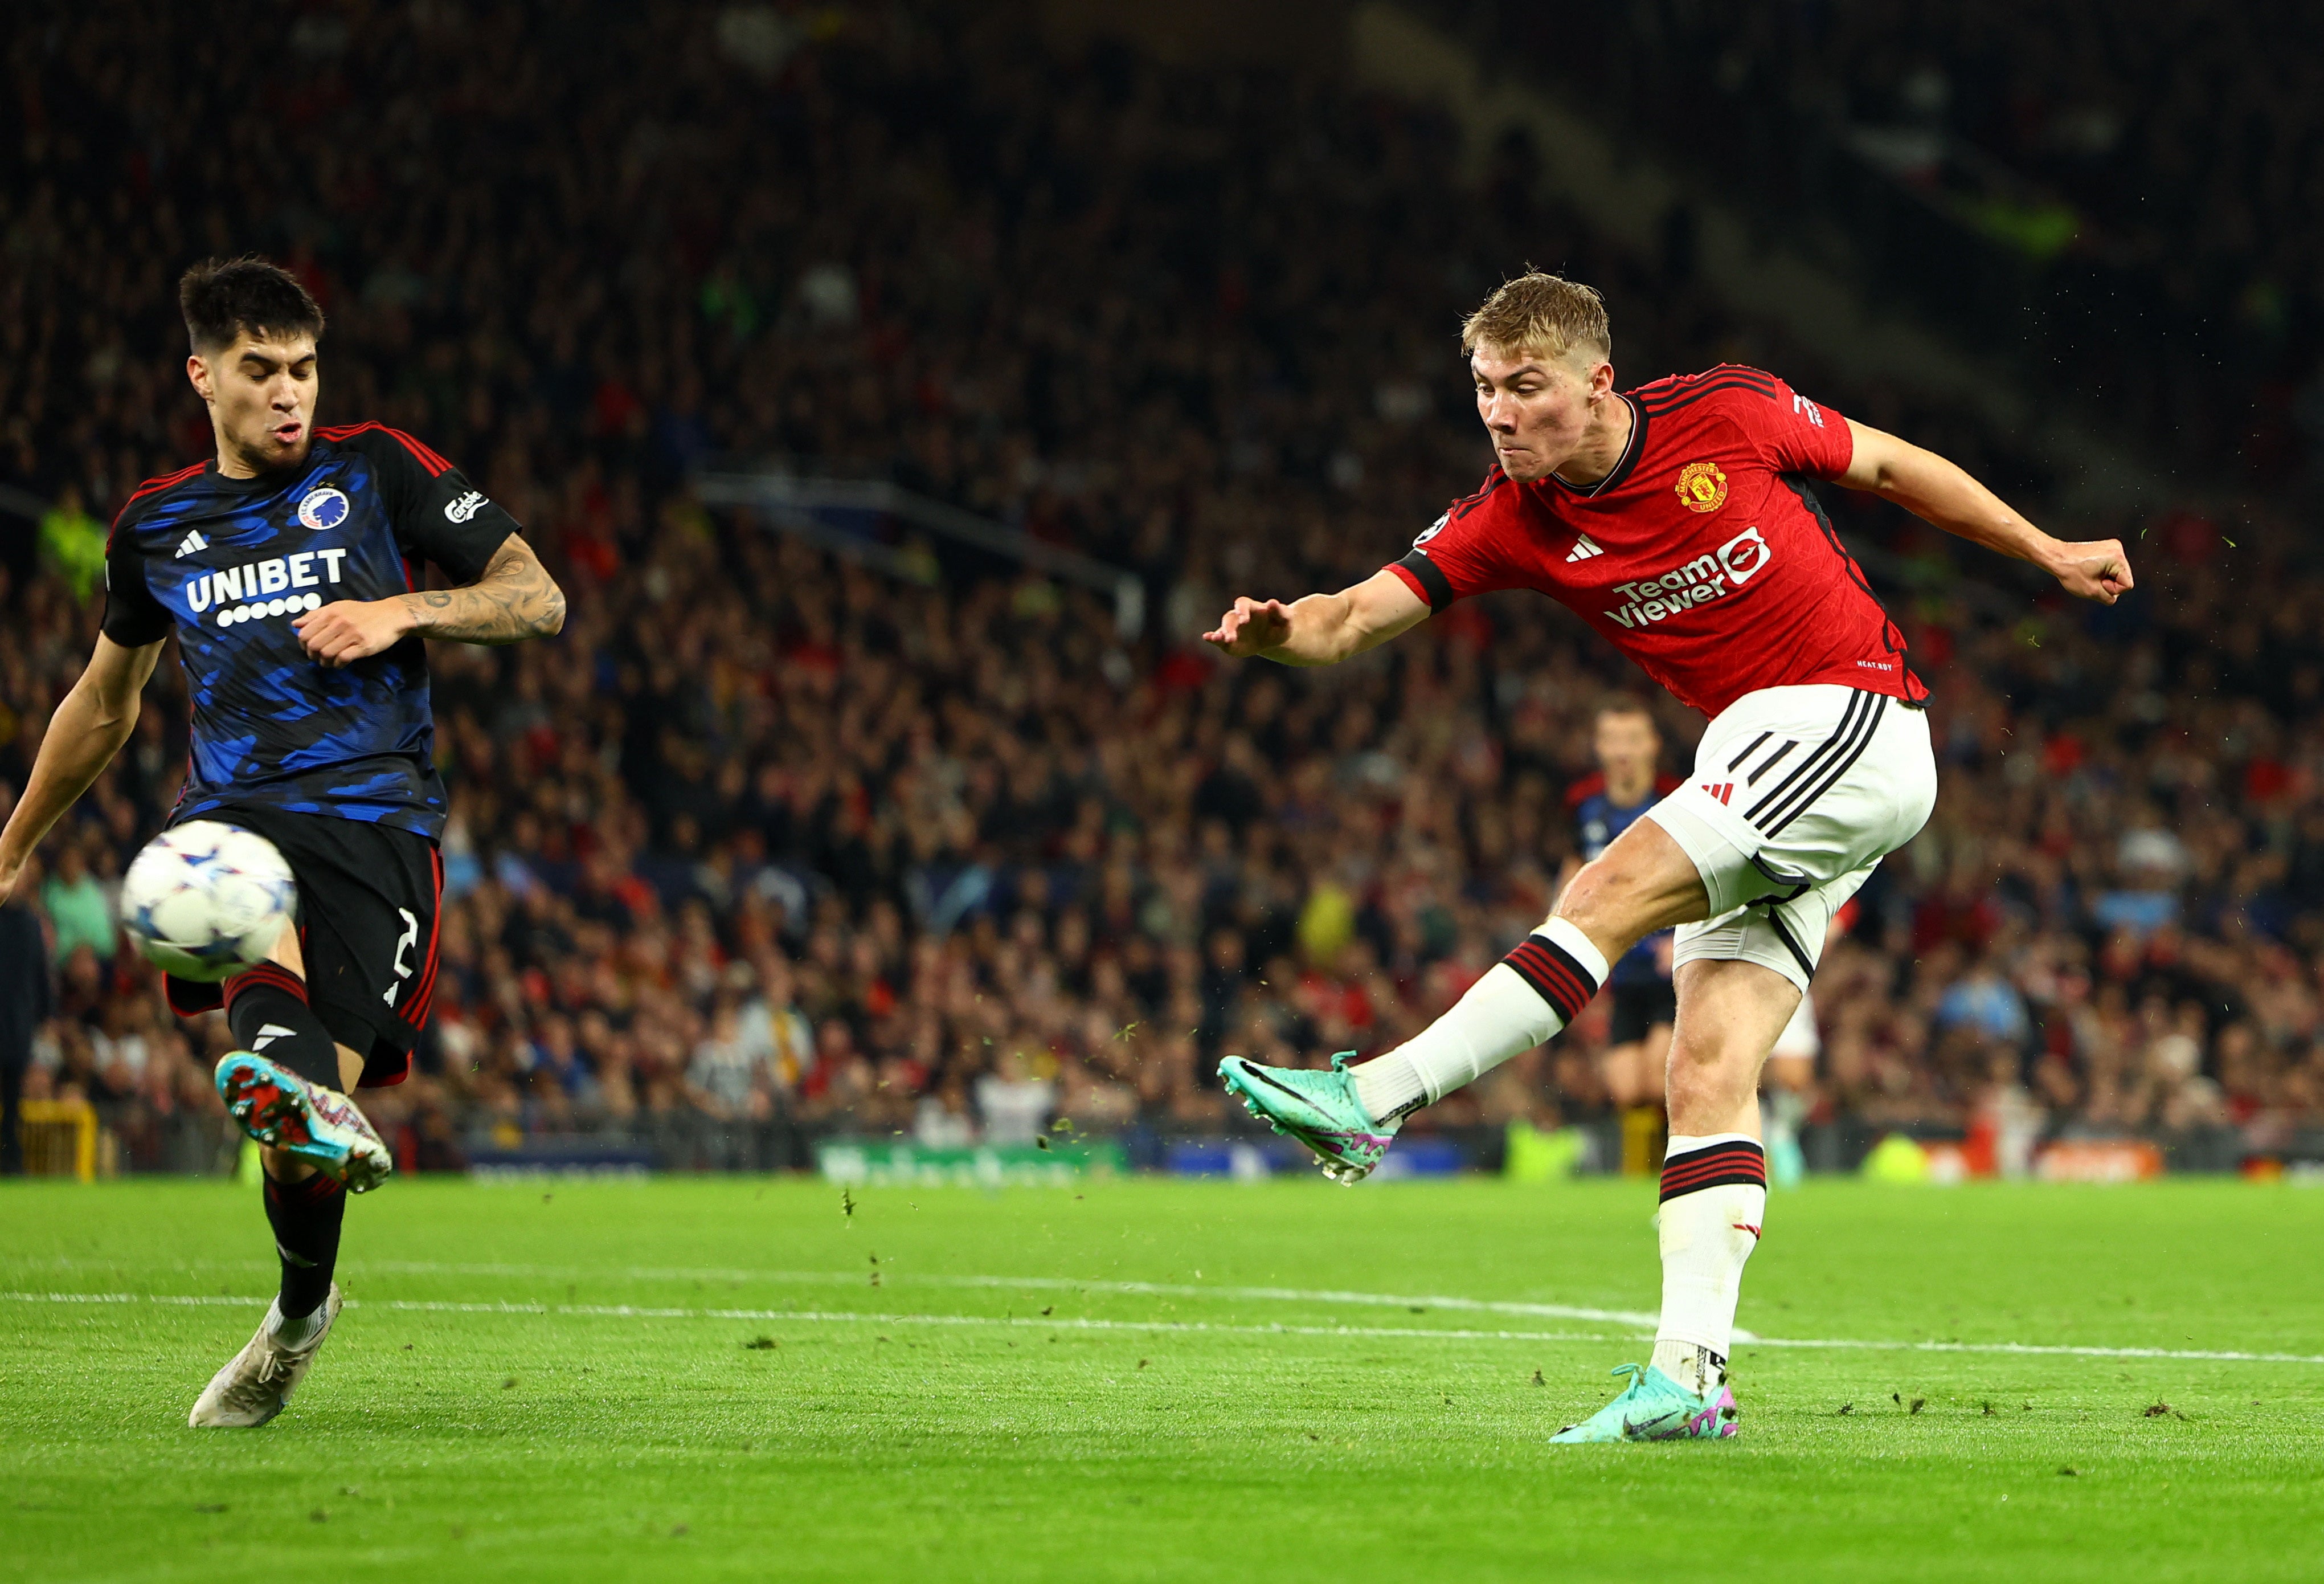 A brief sight at goal saw Rasmus Hojlund blaze his best chance over the top but his forward play was central to Man Utd’s attacking capabilites